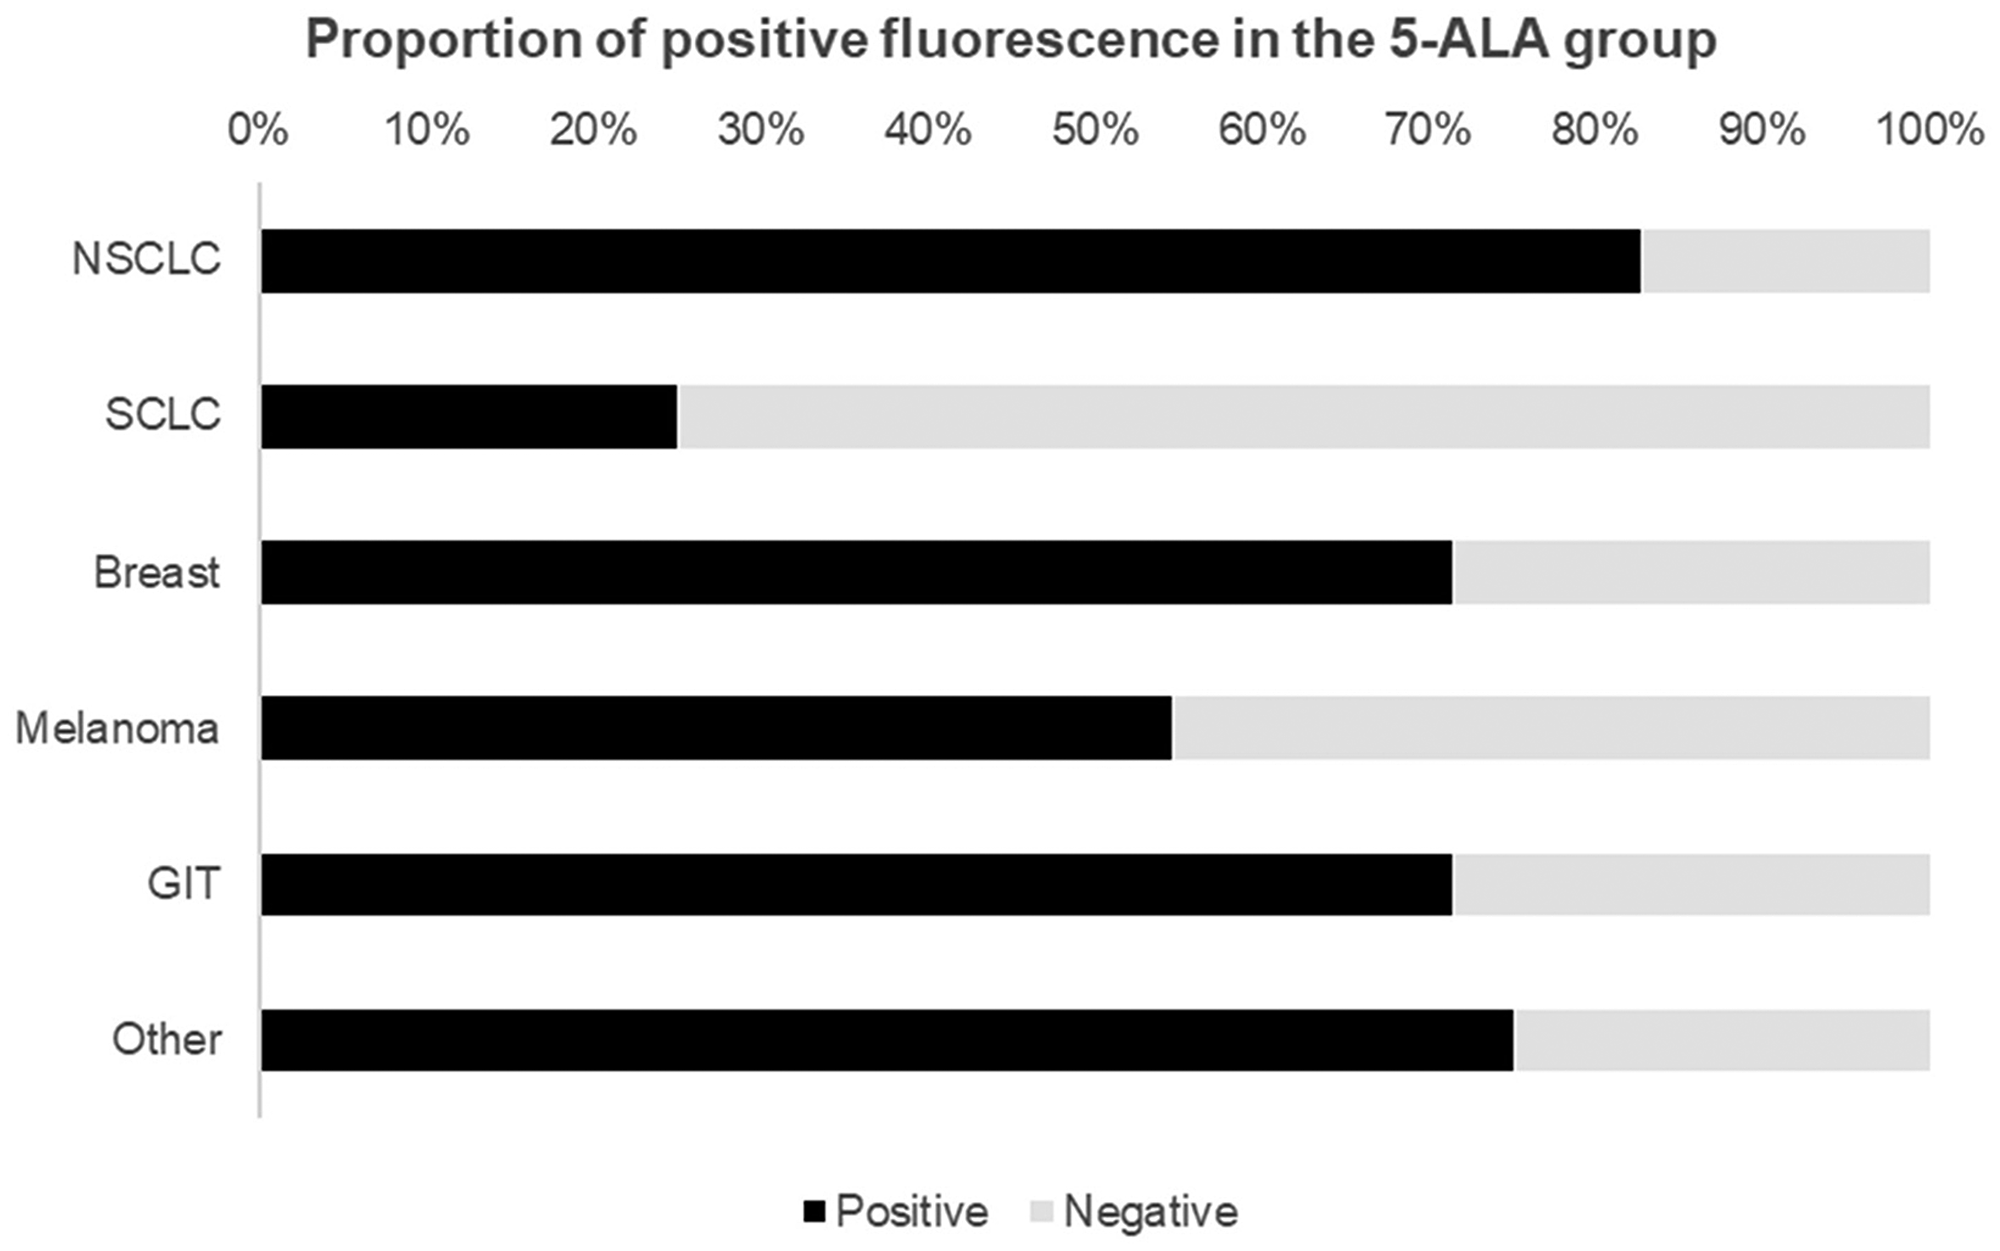 Proportion of positive fluorescence in patients who received 5-ALA prior to induction of surgery showed intraoperative fluorescence in approximately 69% of cases.